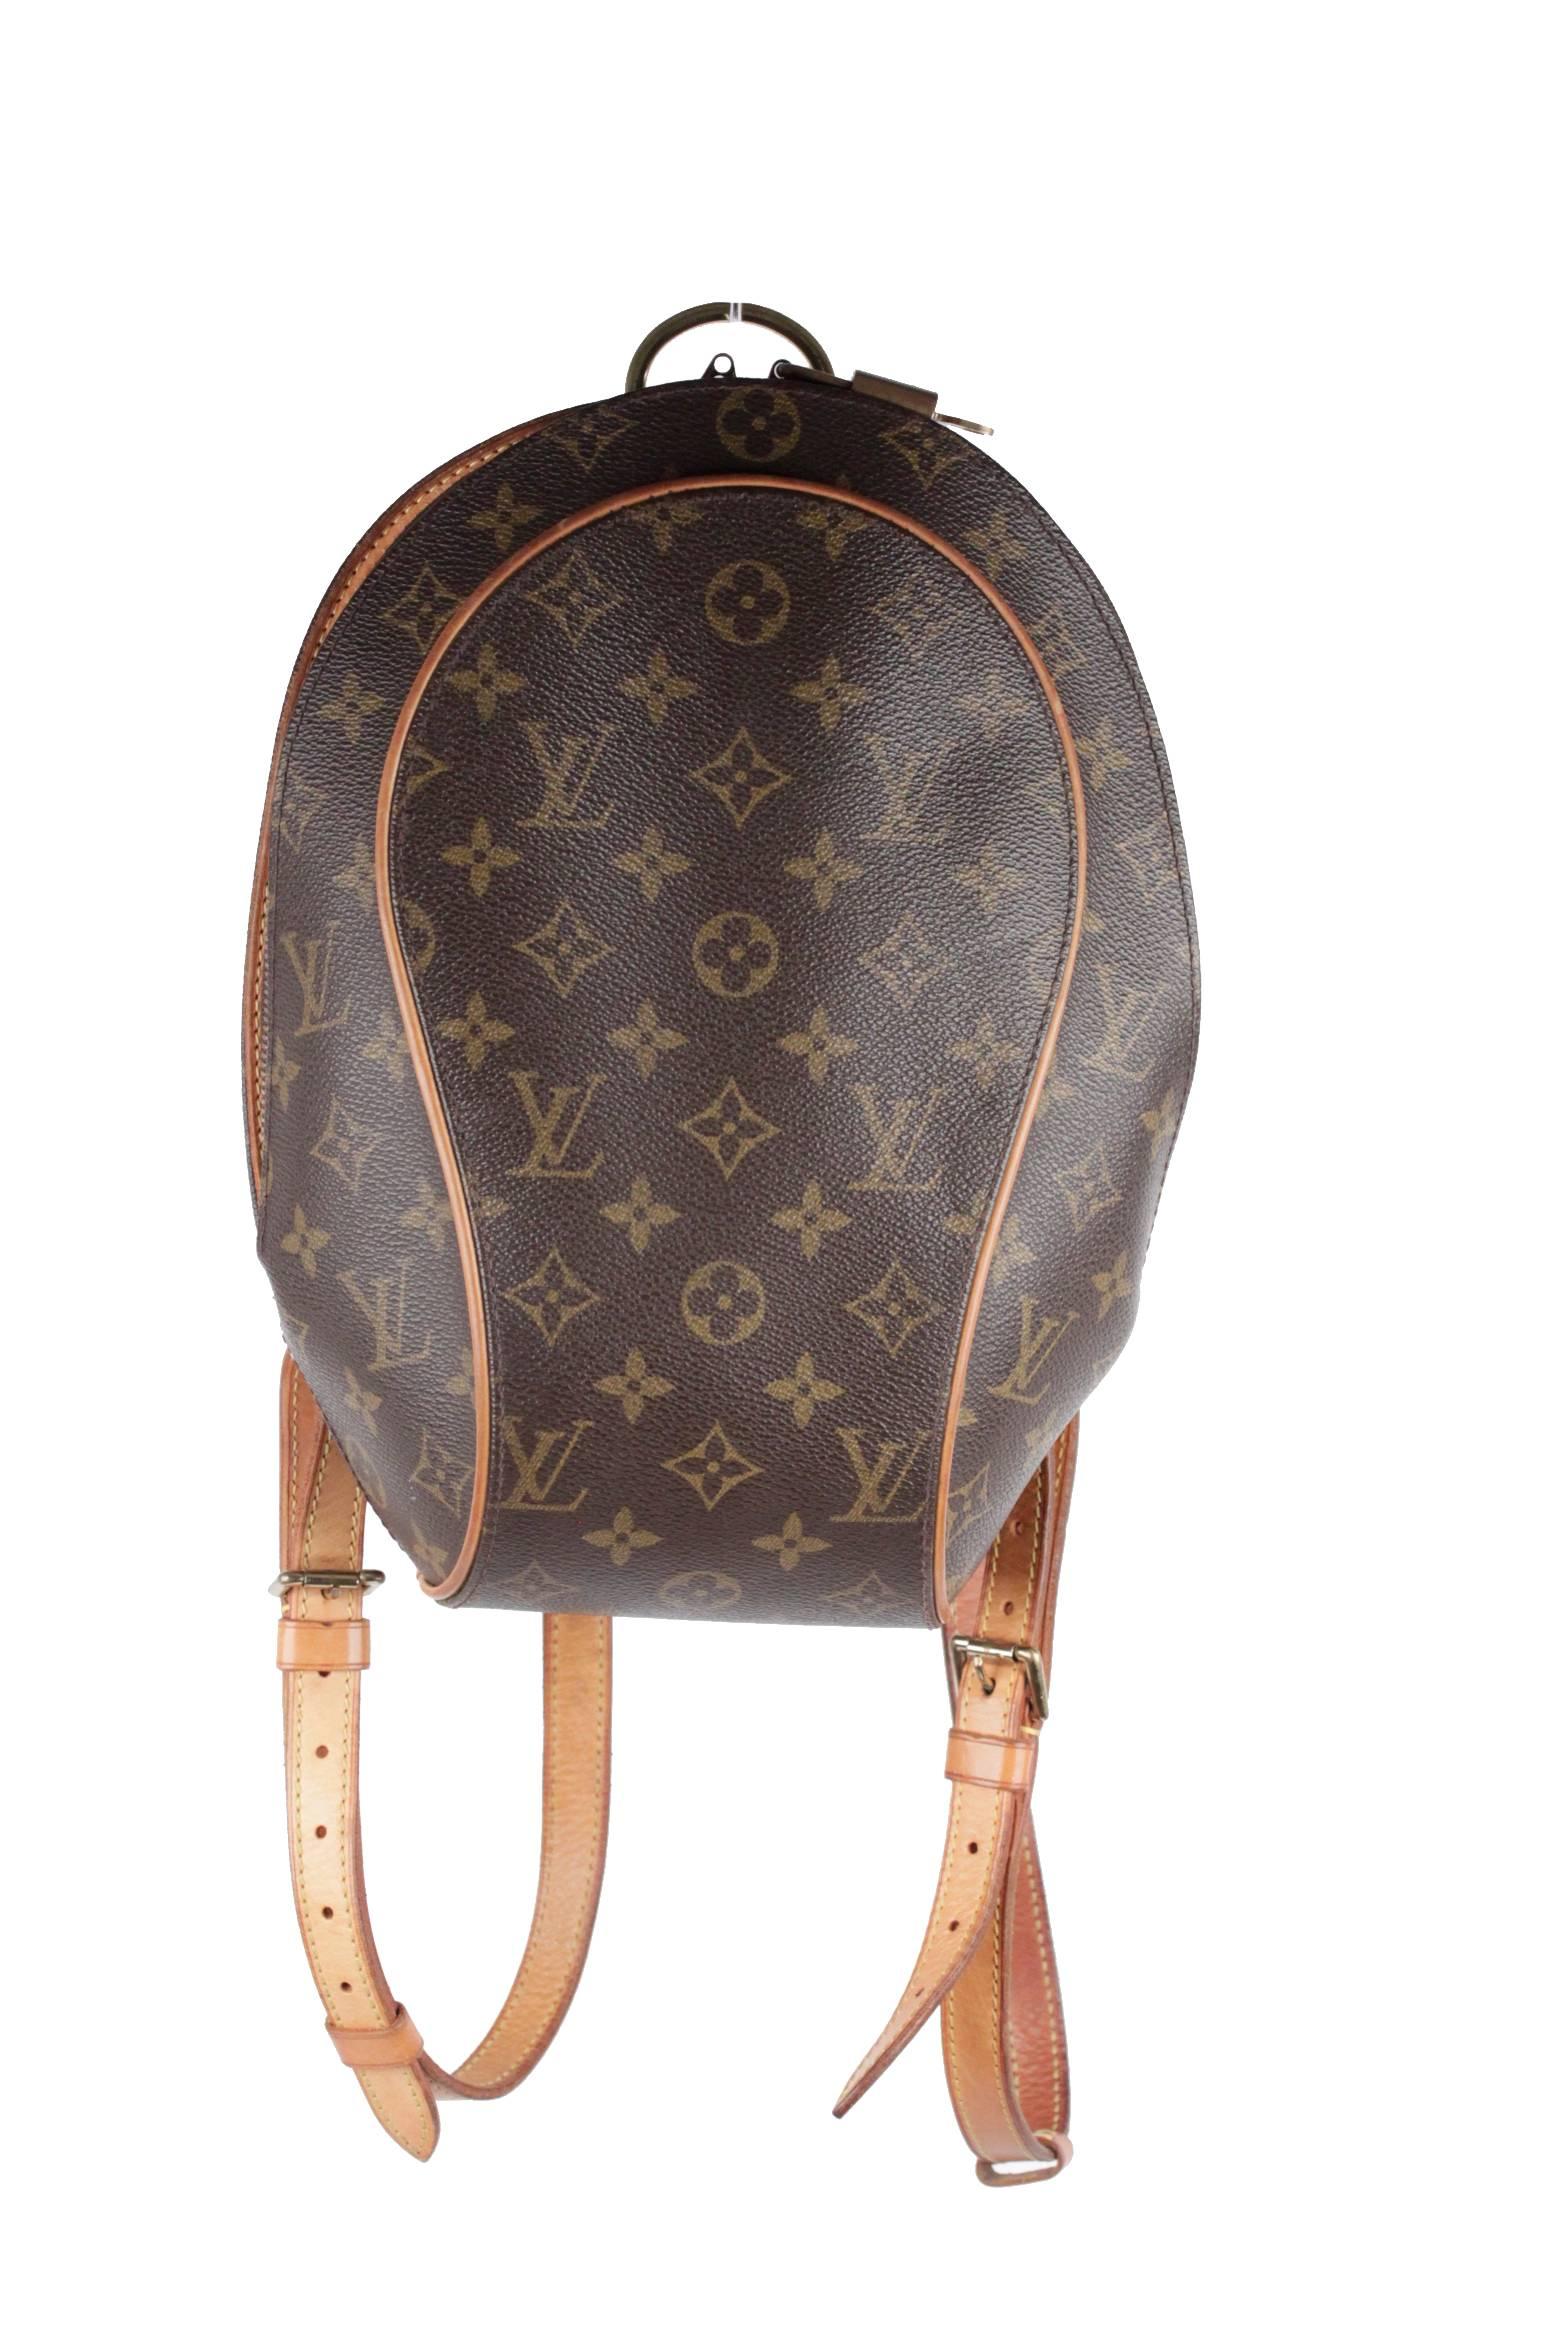 old louis vuitton backpack